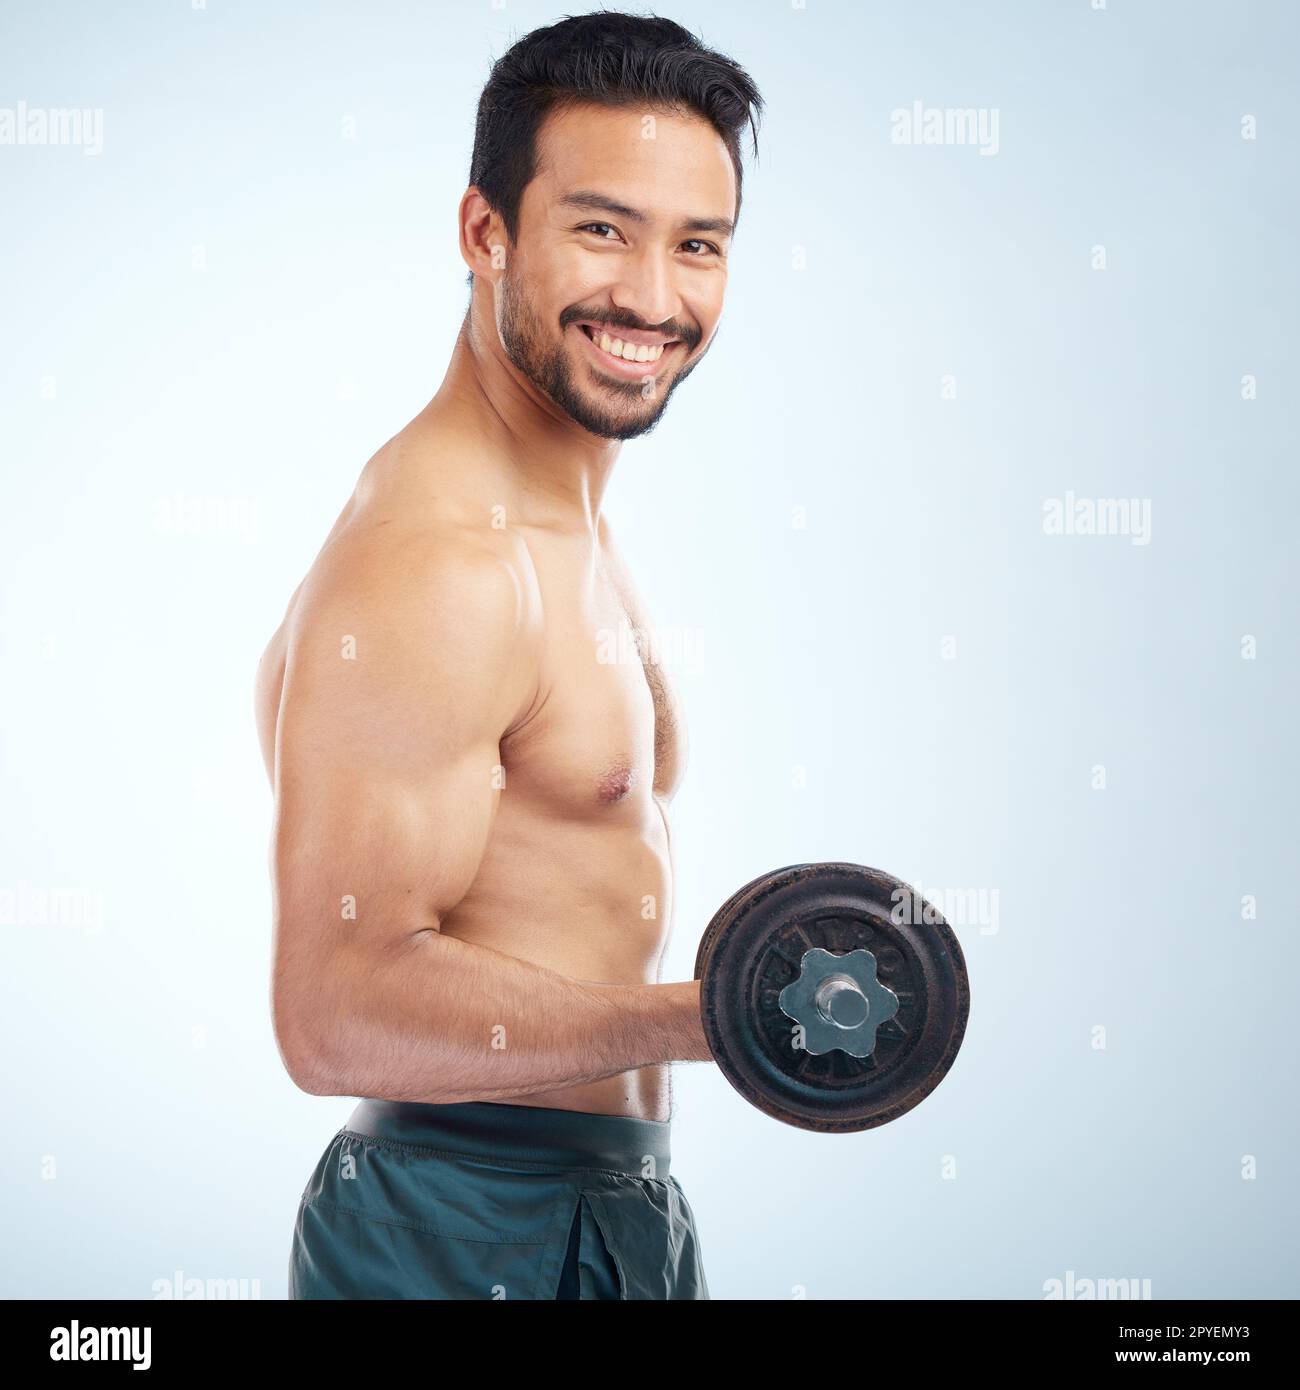 Portrait, fitness or man training with dumbbell in workout or exercise in studio for strong arms, biceps or body goals. Muscles, mindset or happy bodybuilder sports athlete weightlifting with mock up Stock Photo